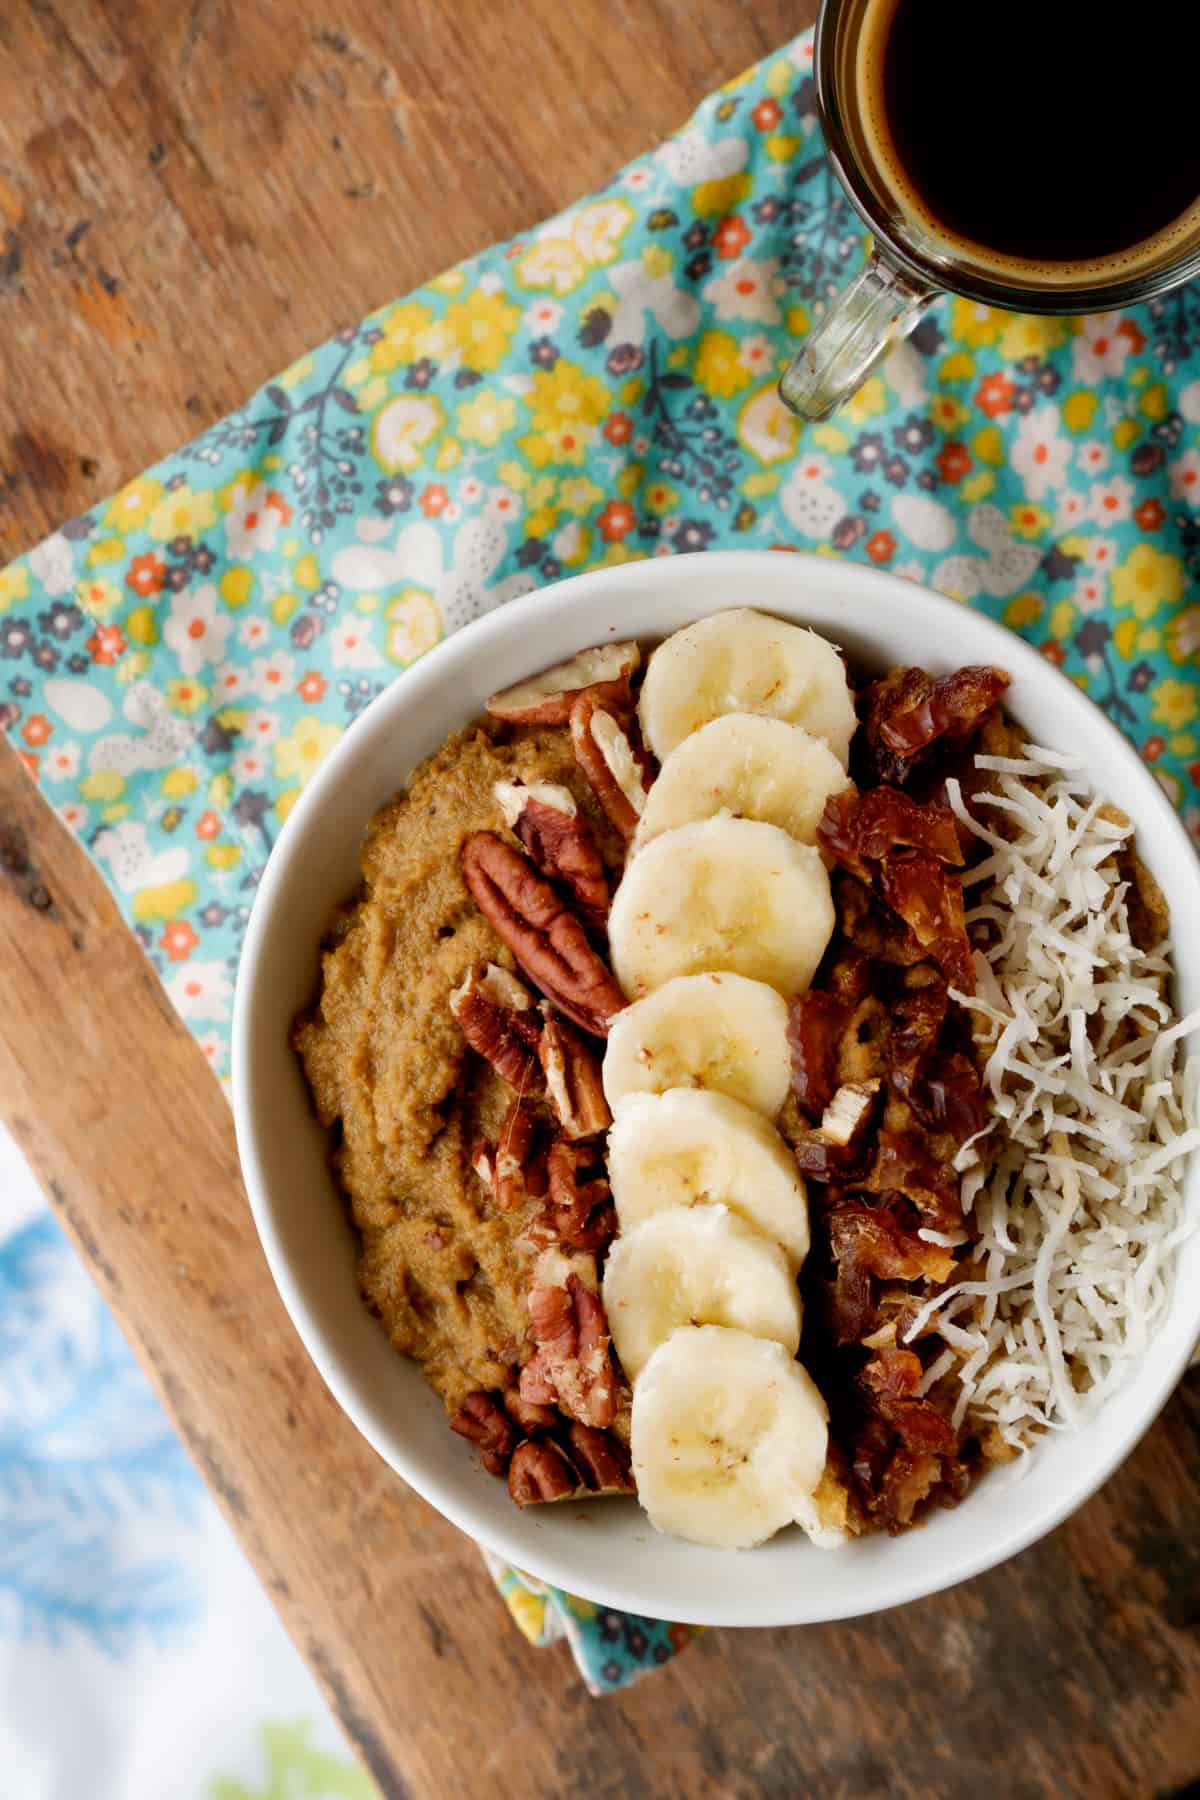 Whole30 sweet potato breakfast bowl close up. On bed tray with a cup of coffee. Topped with bananas, coconut flakes, dates and pecans.